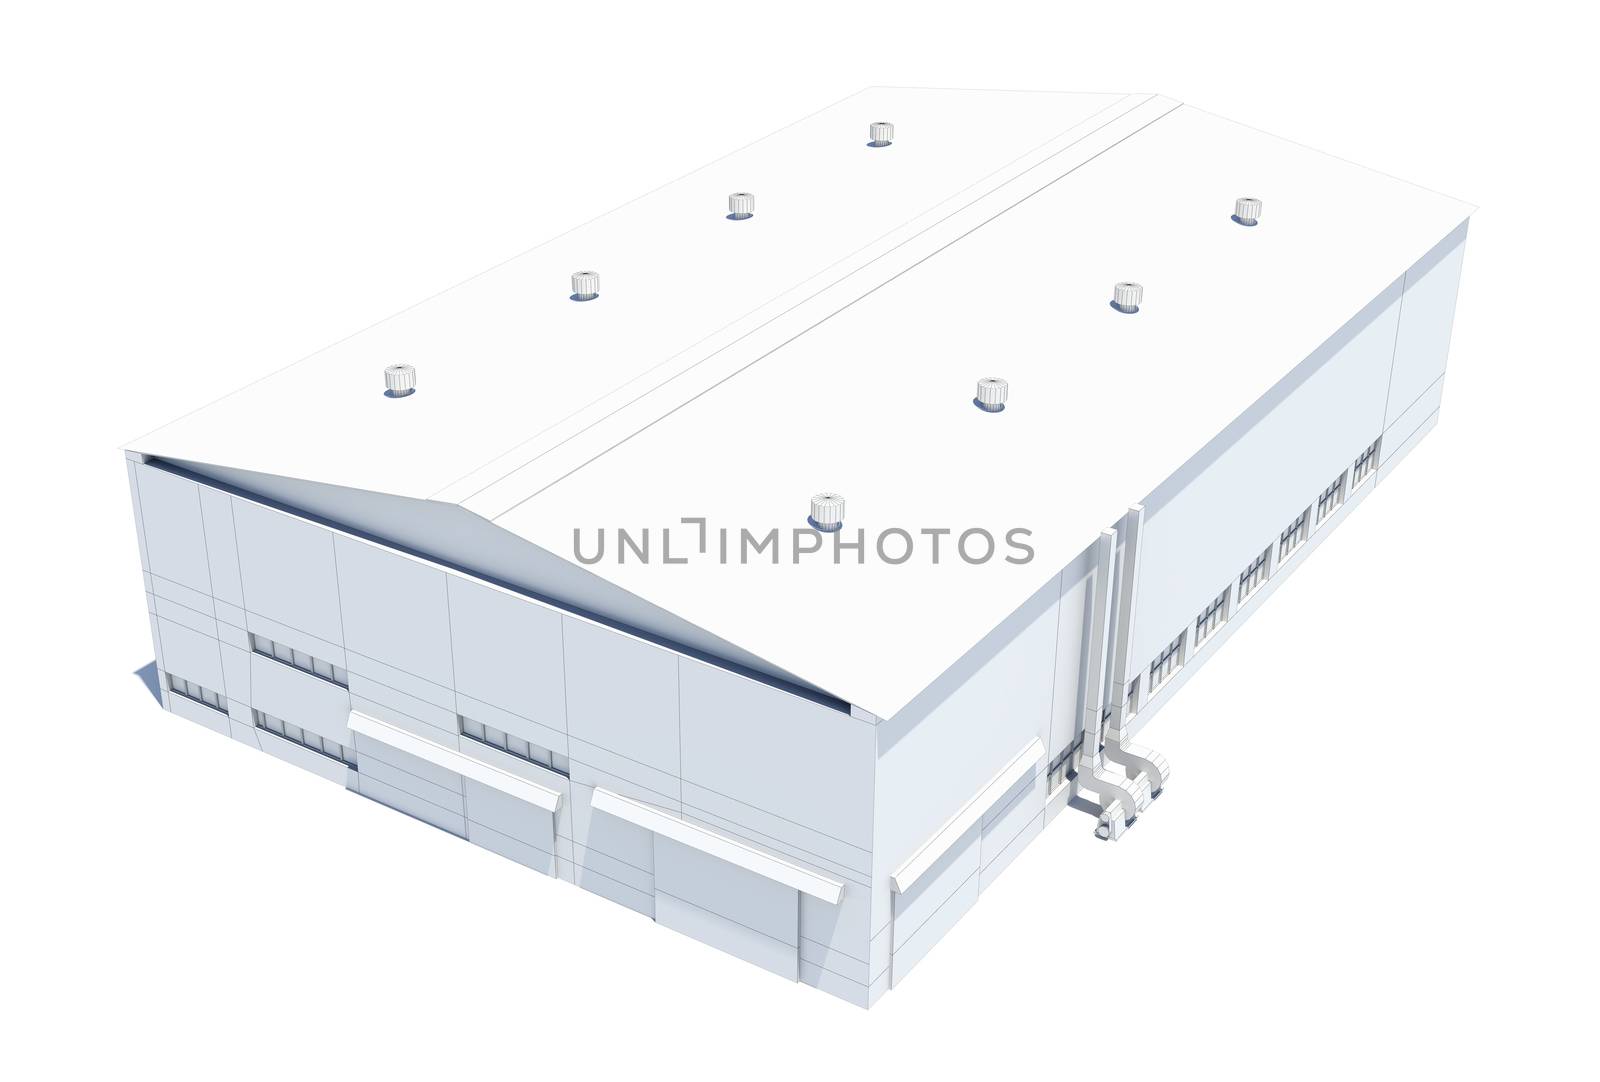 Hangar building. White wire-frame. Isolated on white, 3D Illustration